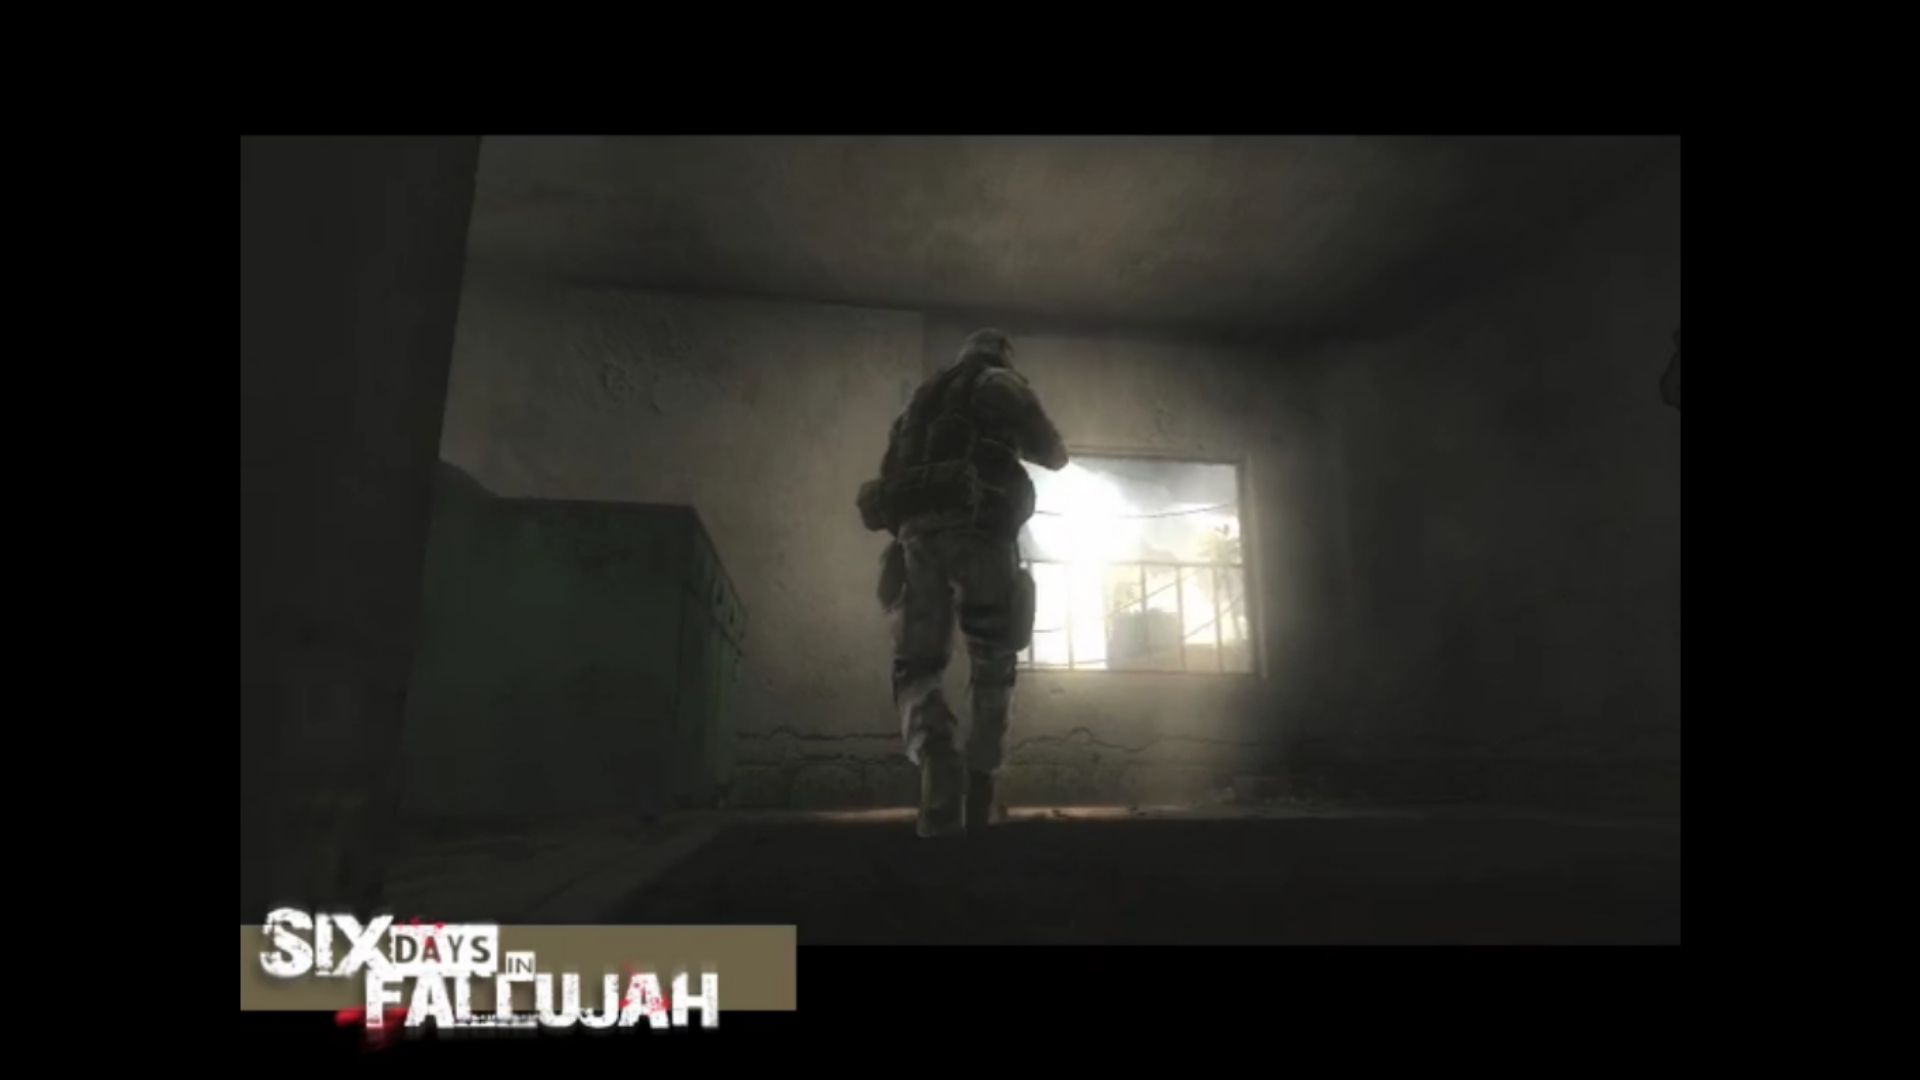 A soldier running to a window in the original Six Days in Fallujah